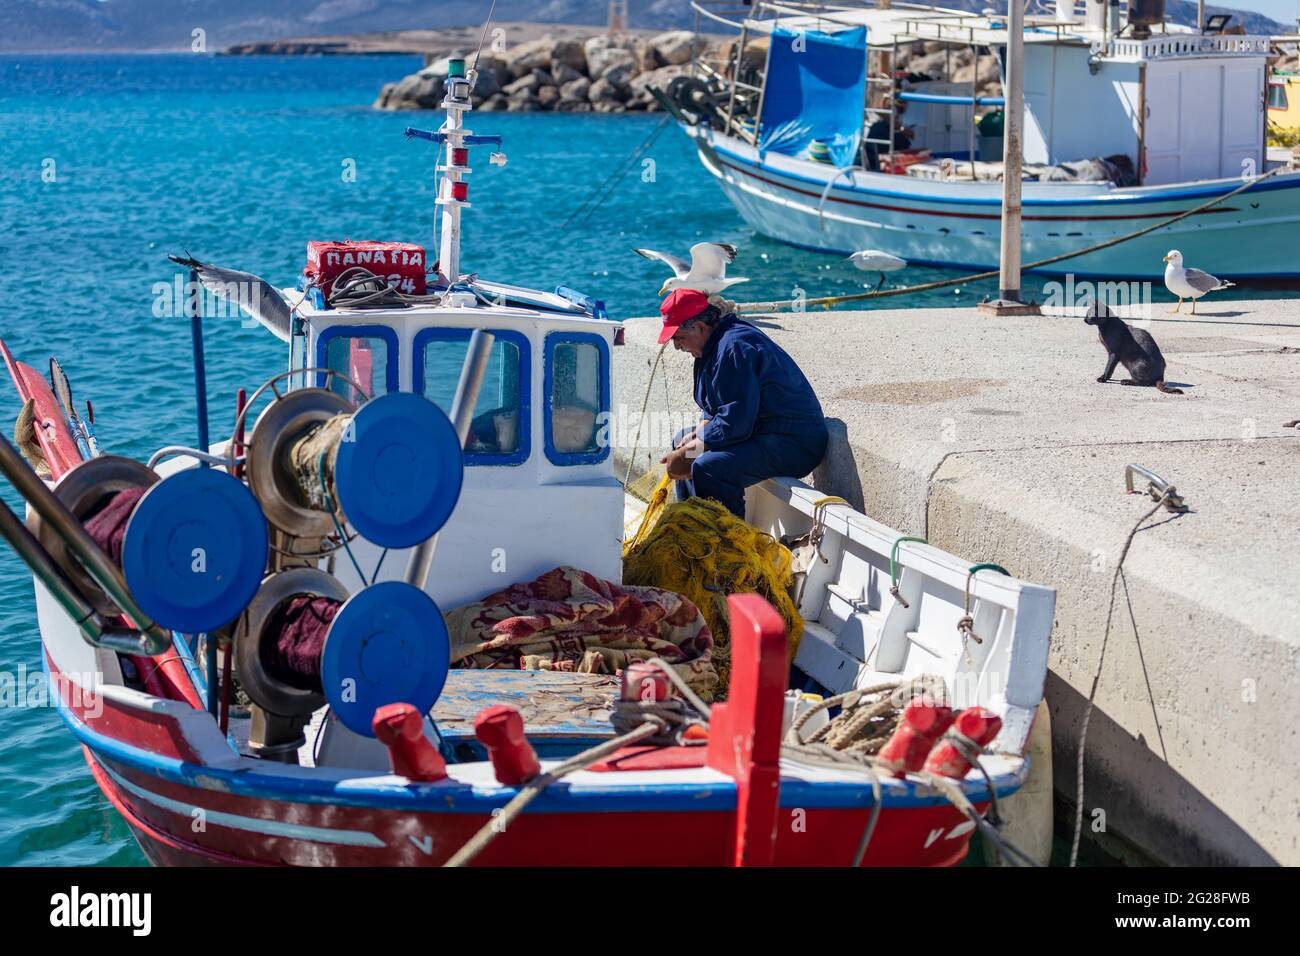 Greece. Koufonisi island, Cyclades, May 23, 2021. Afetr fishing scene at harbour dock. Fisherman working with the nets on a moored boat, seagulls look Stock Photo